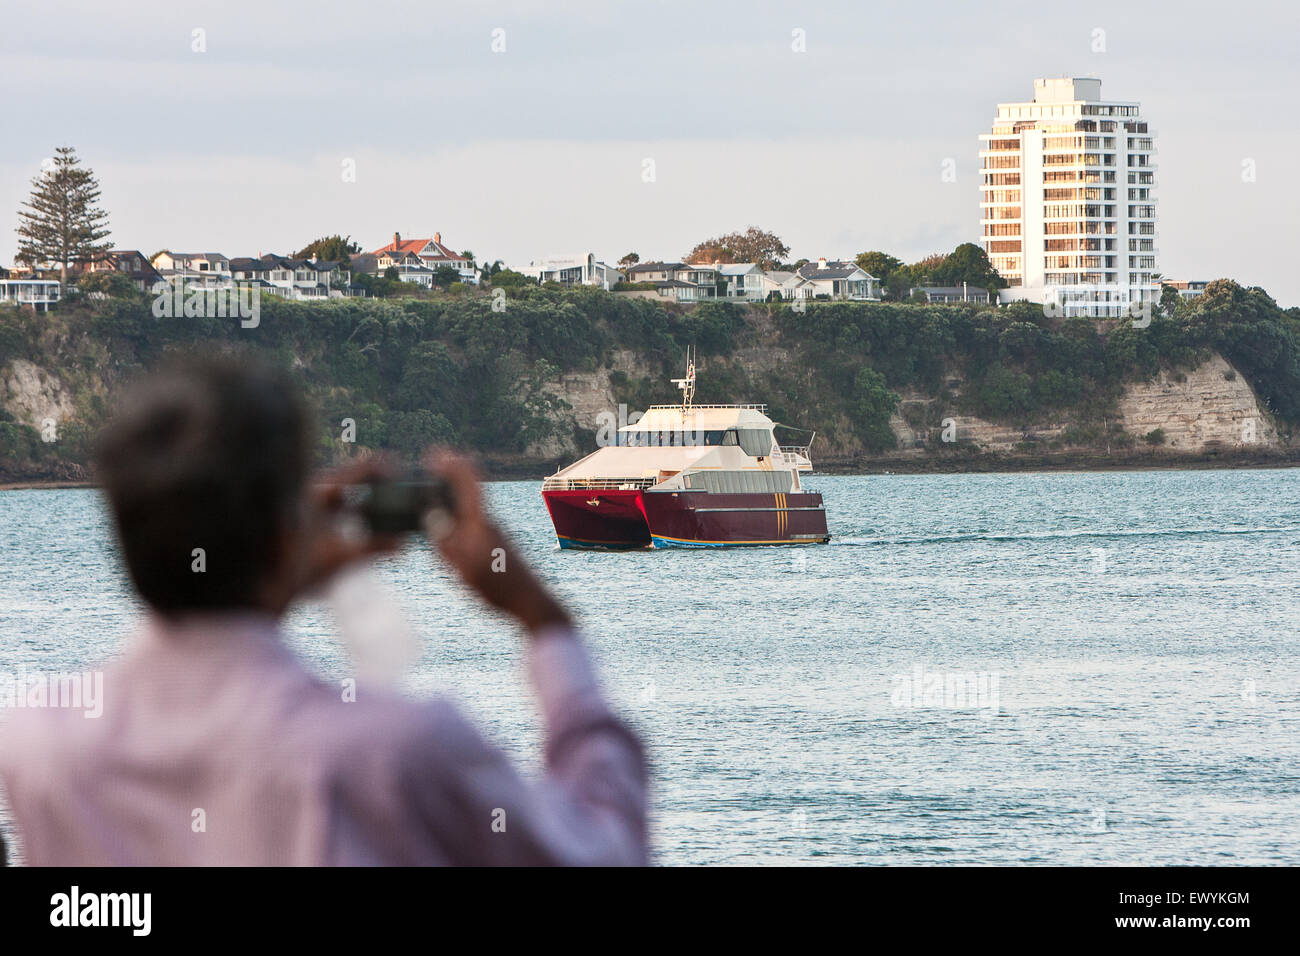 Man photographing ferry boat in Auckland Harbour. Heading to Auckland Ferry Terminal from Devonport. Auckland,New Zealand Stock Photo